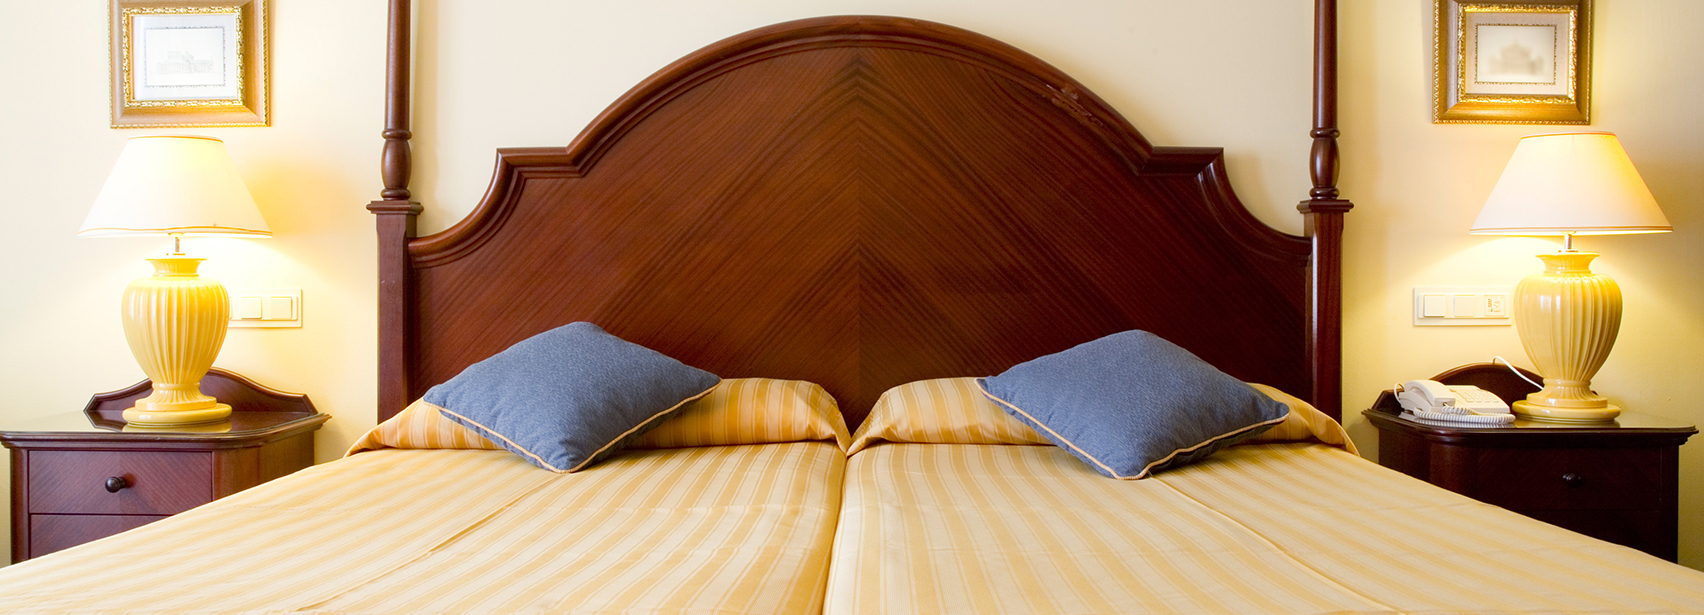 Two Twins Into A King Size Mattress, Convert Twin Beds To King Size